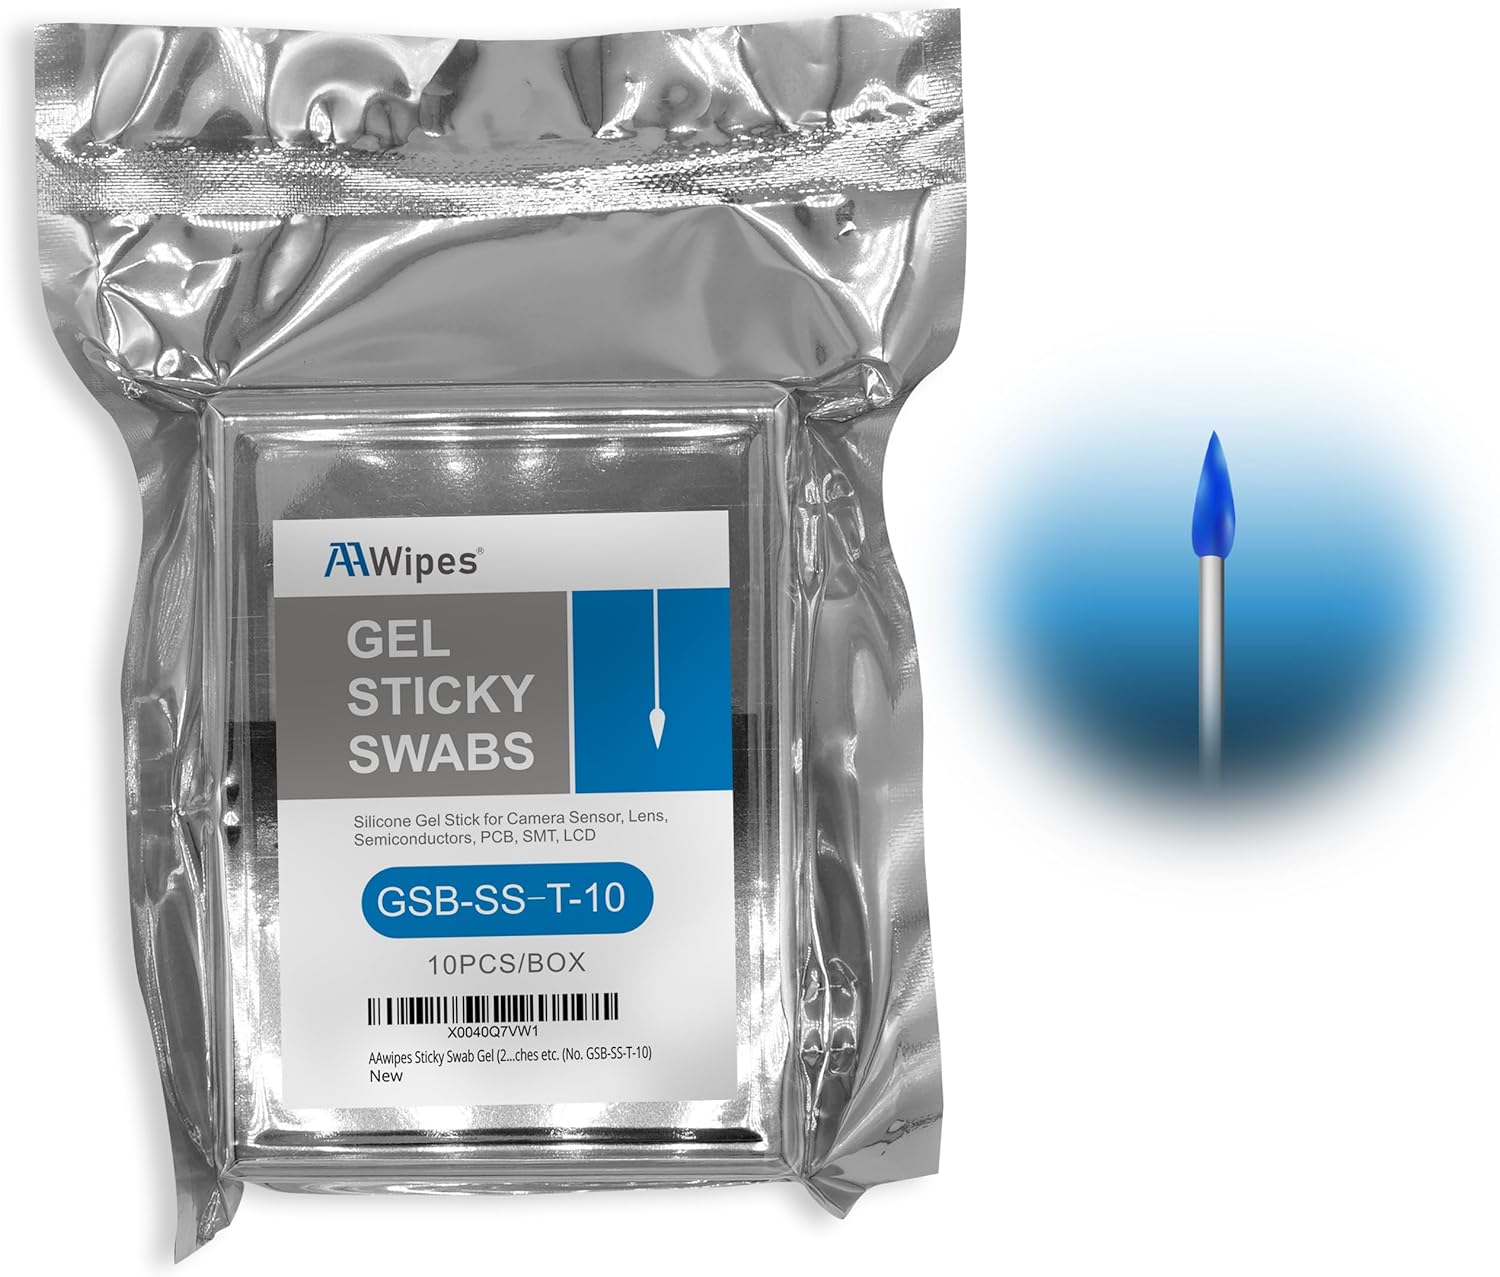 AAwipes Sticky Swab Gel (2.0 mm/0.08 inch Tipped Head, 100 Swabs Blue) Sticky Pen Silicone Gel Stick for Camera Sensors, LCD, Semiconductors, PCB, SMT & Watches etc. (No. GSB-SS-T-100)